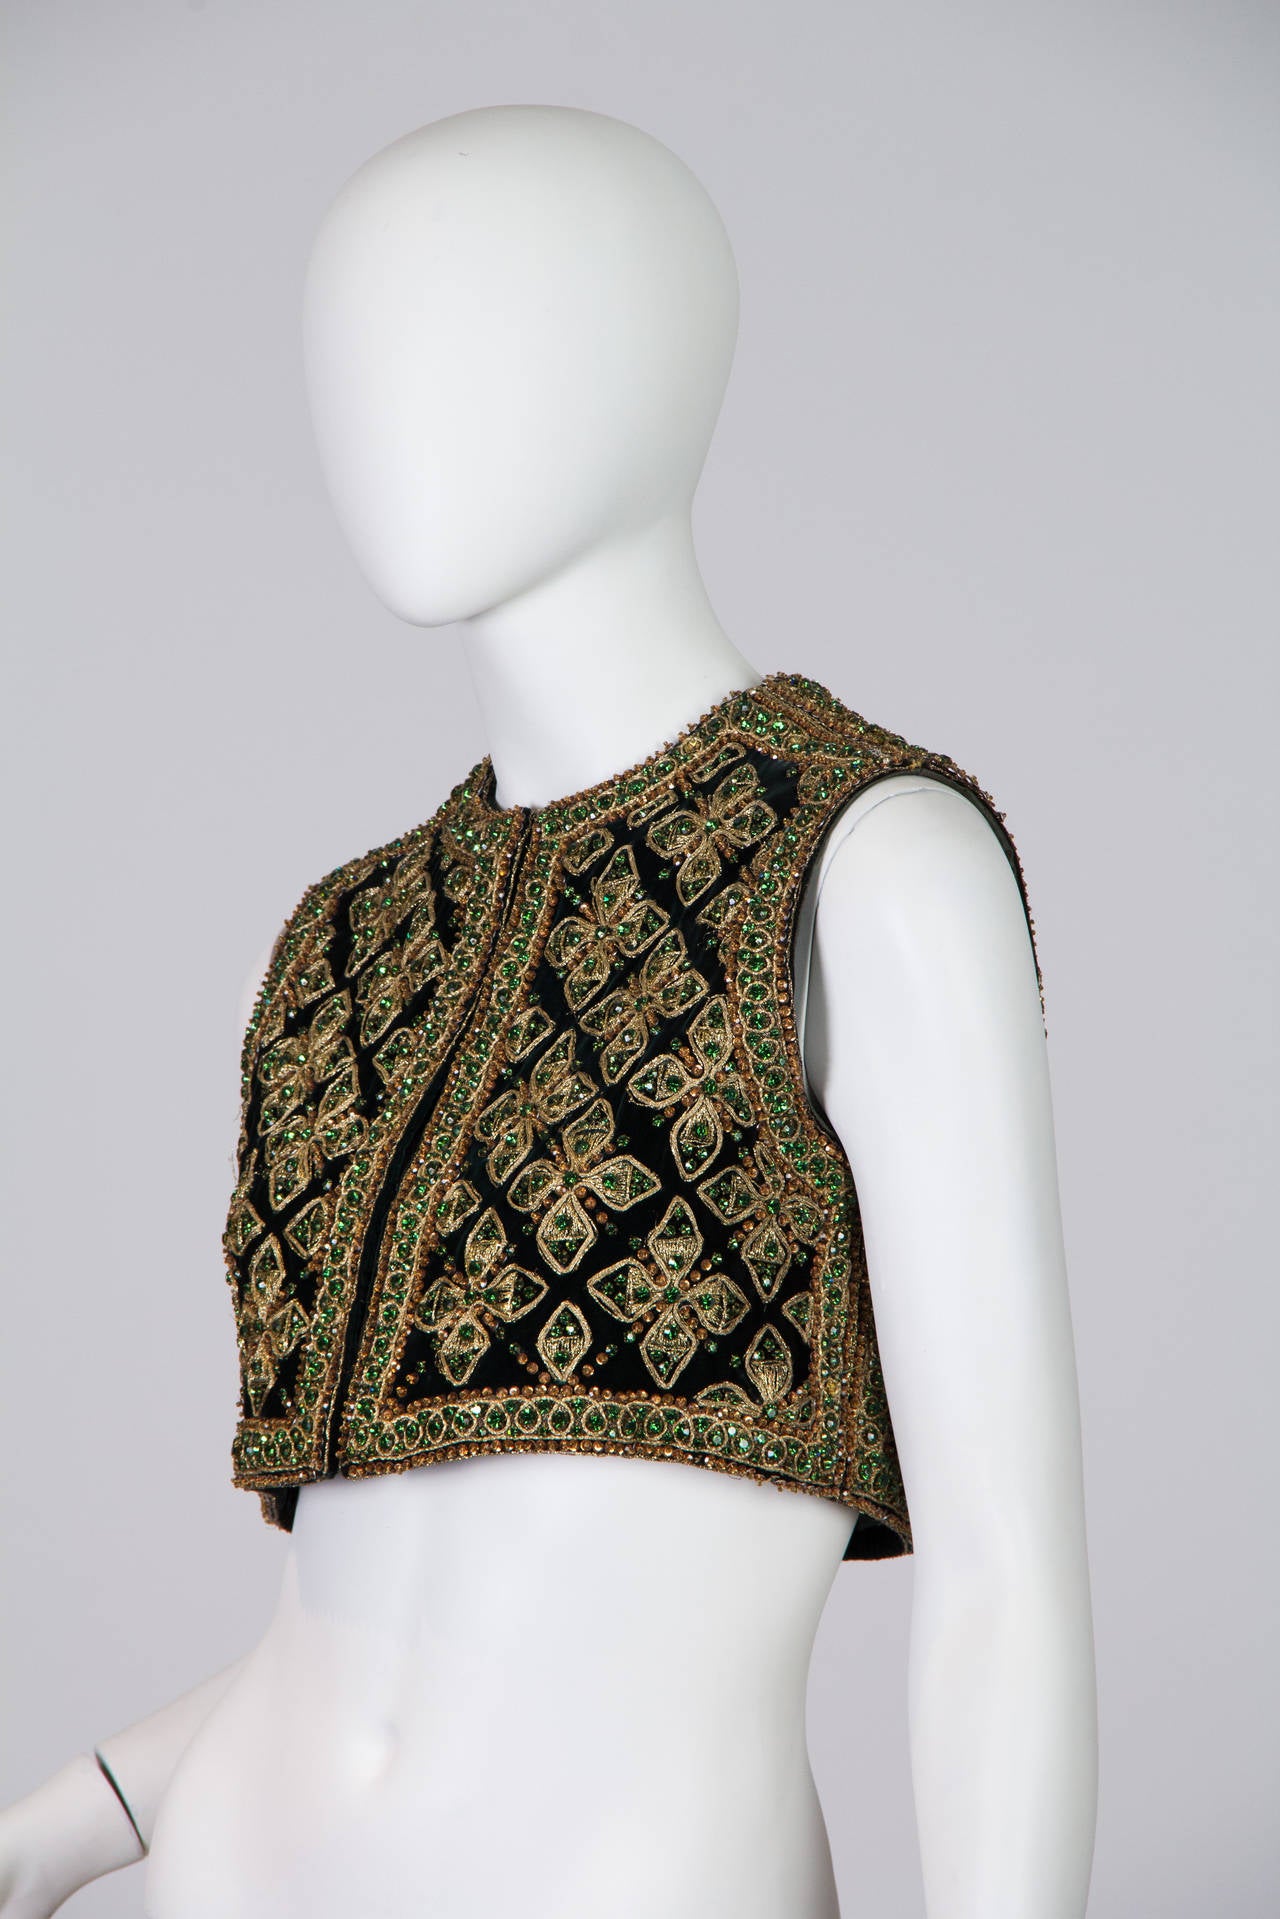 This jawdropping vest by Marie McCarthy for Larry Aldrich is made of heavily embroidered and beaded velvet and lined with shot emerald silk. The design, richly picked out in greens and golds, brings to mind a Byzantine mosaic or medieval stained